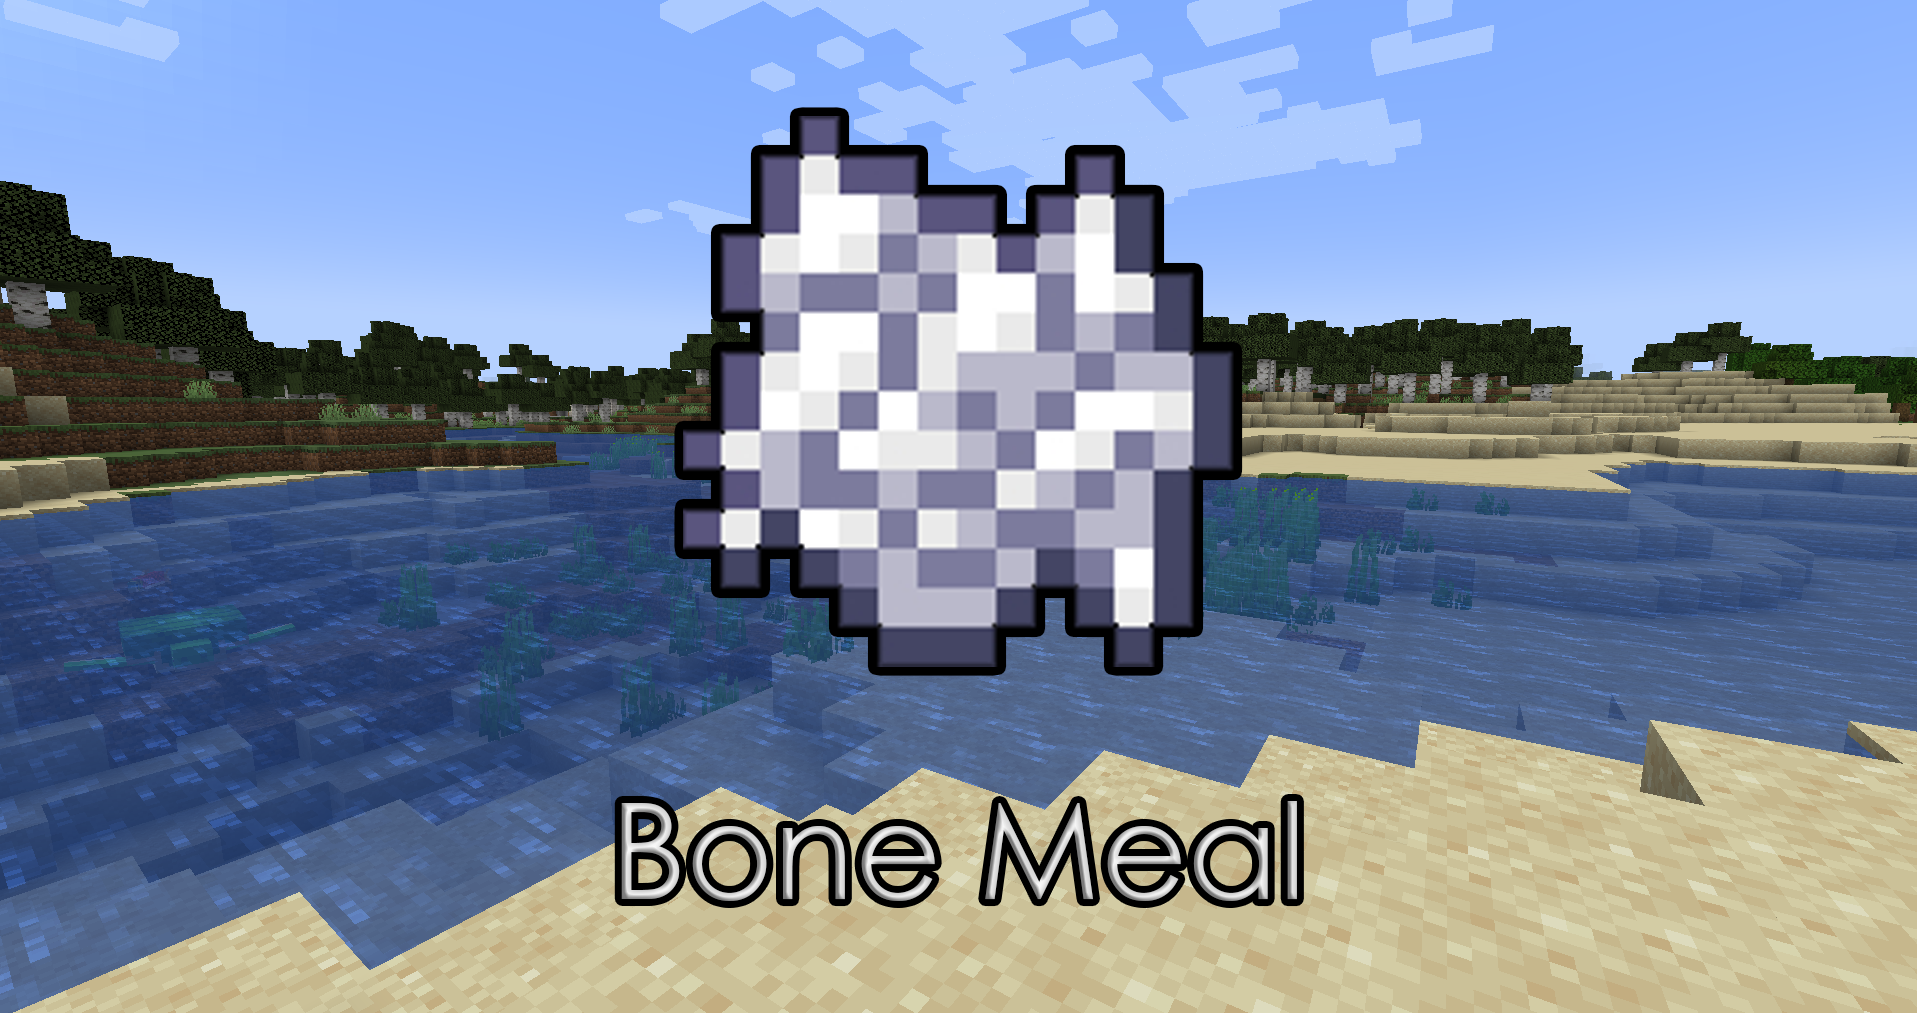 How To Use Bone Meal in Minecraft